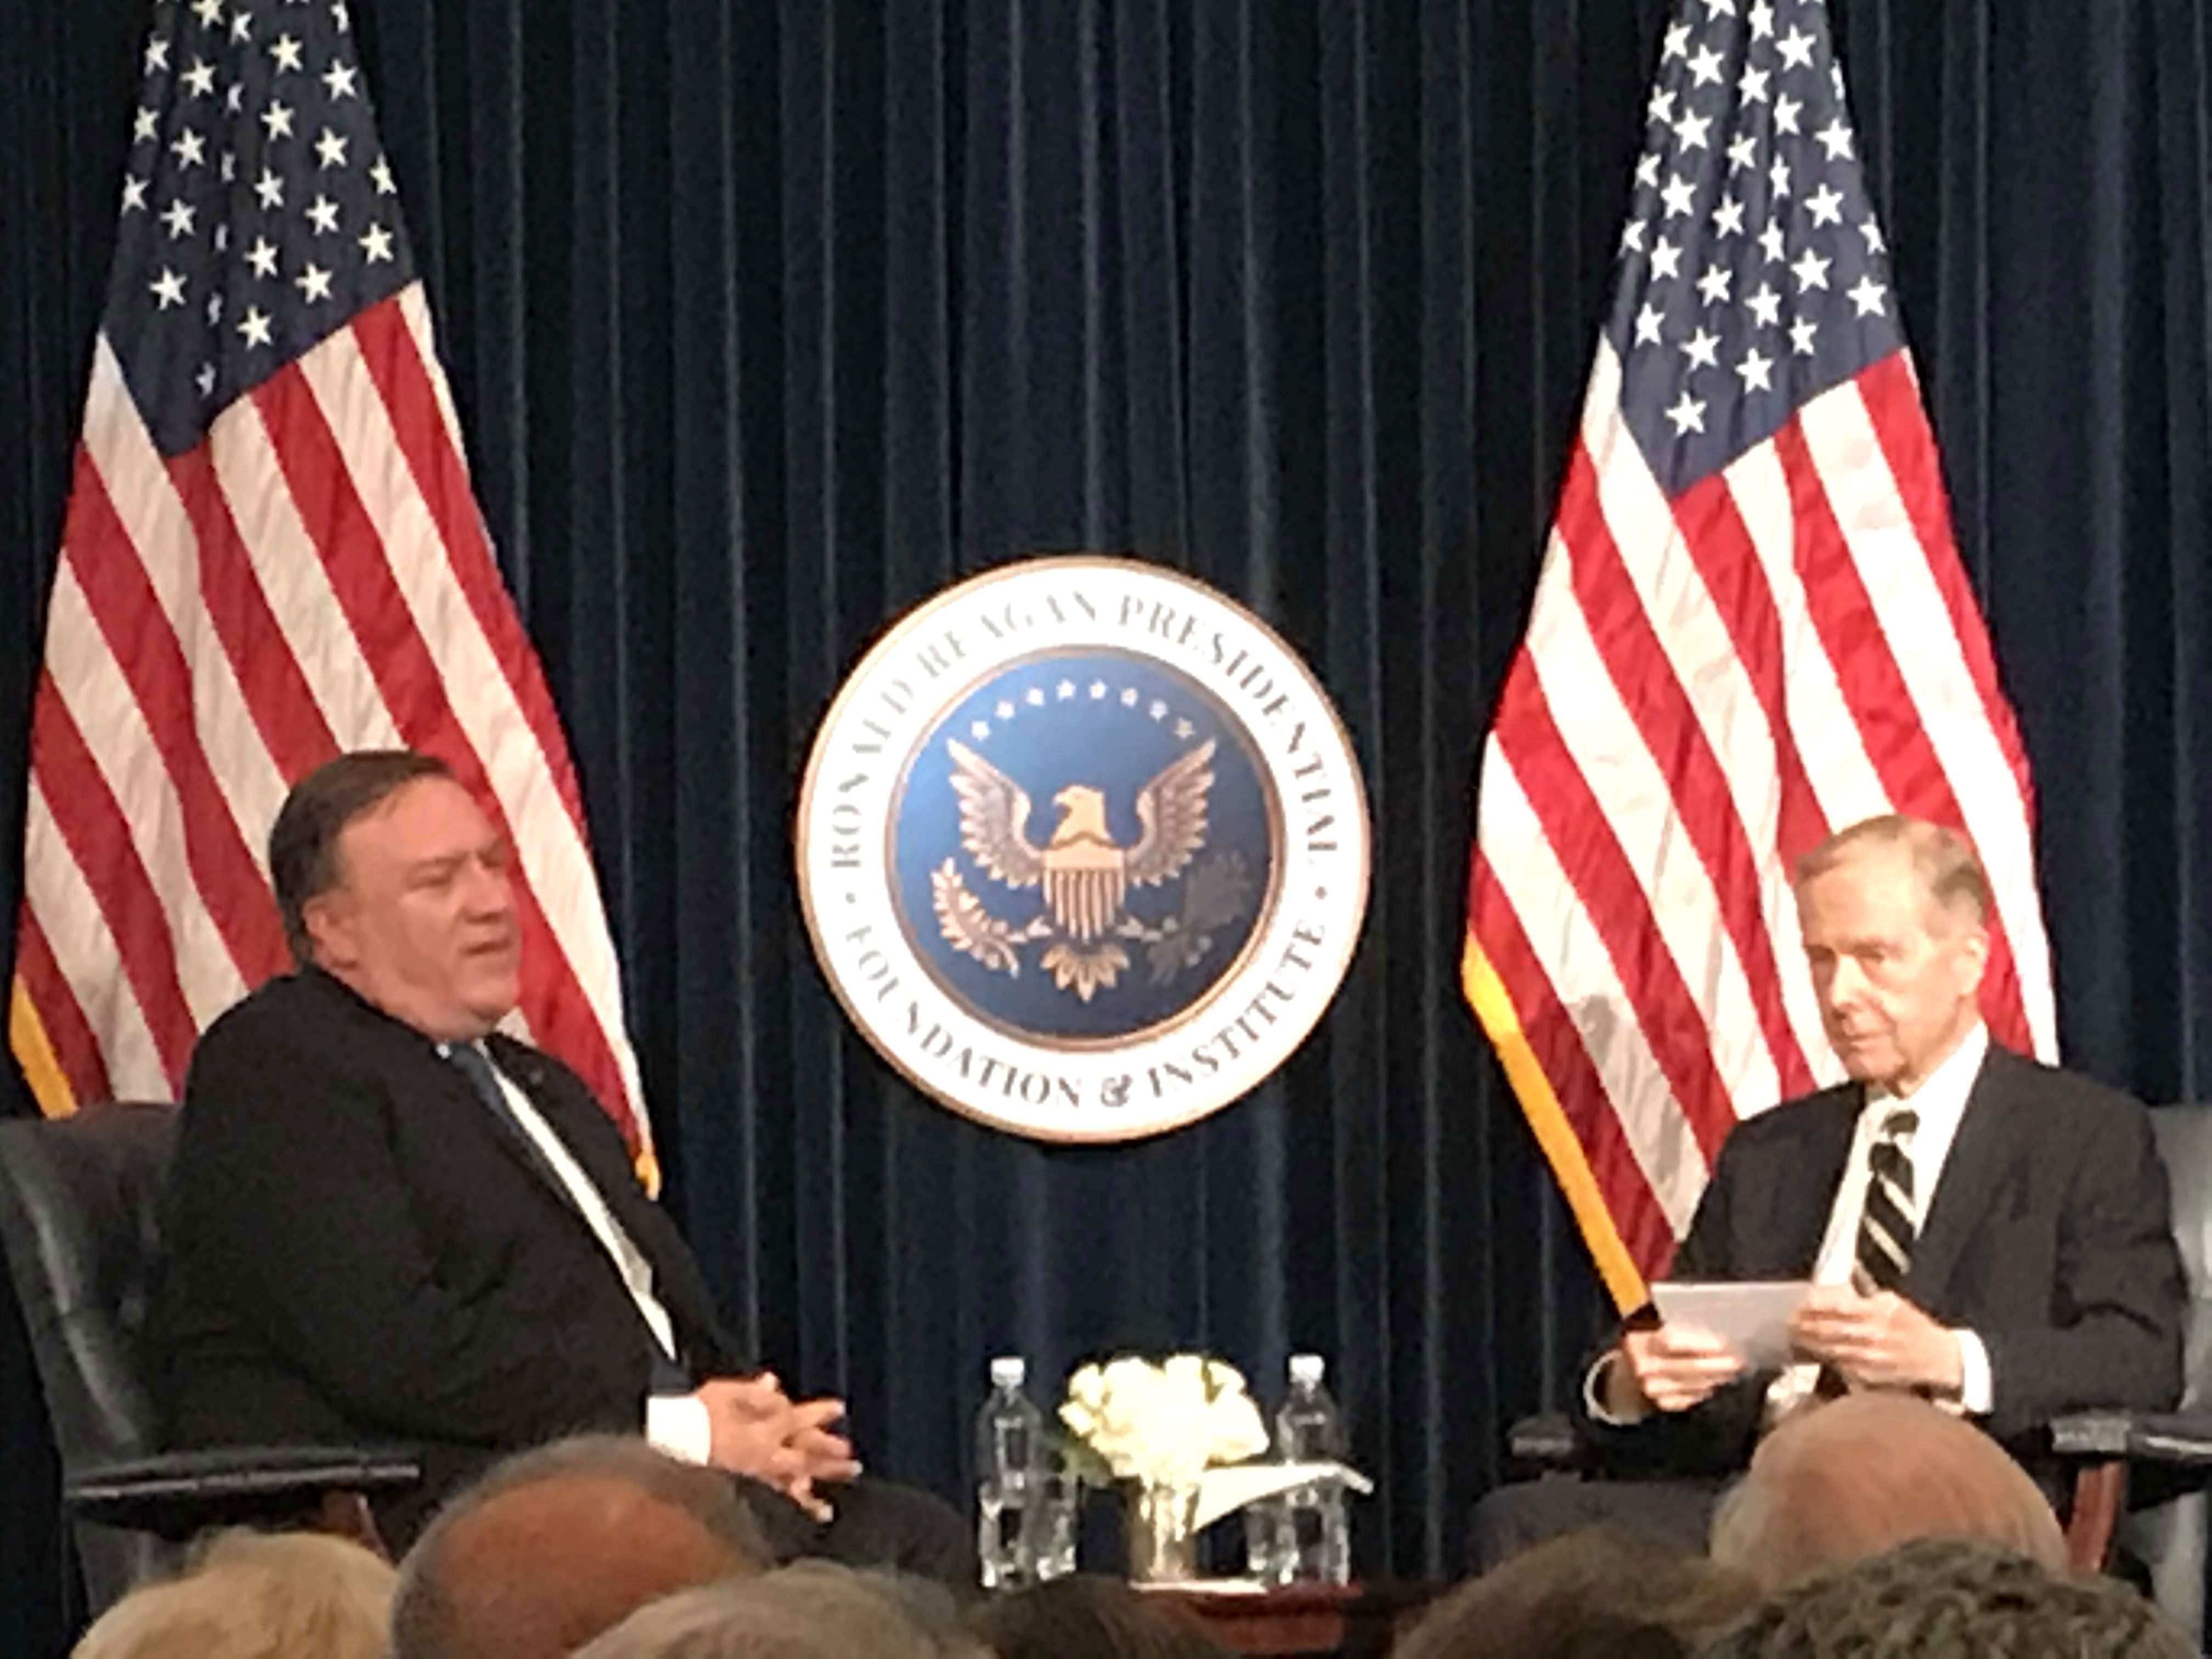 On Stage Q&A Secretary Mike Pompeo with former California Governor Pete Wilson (Photo credit: Nurit Geenger)